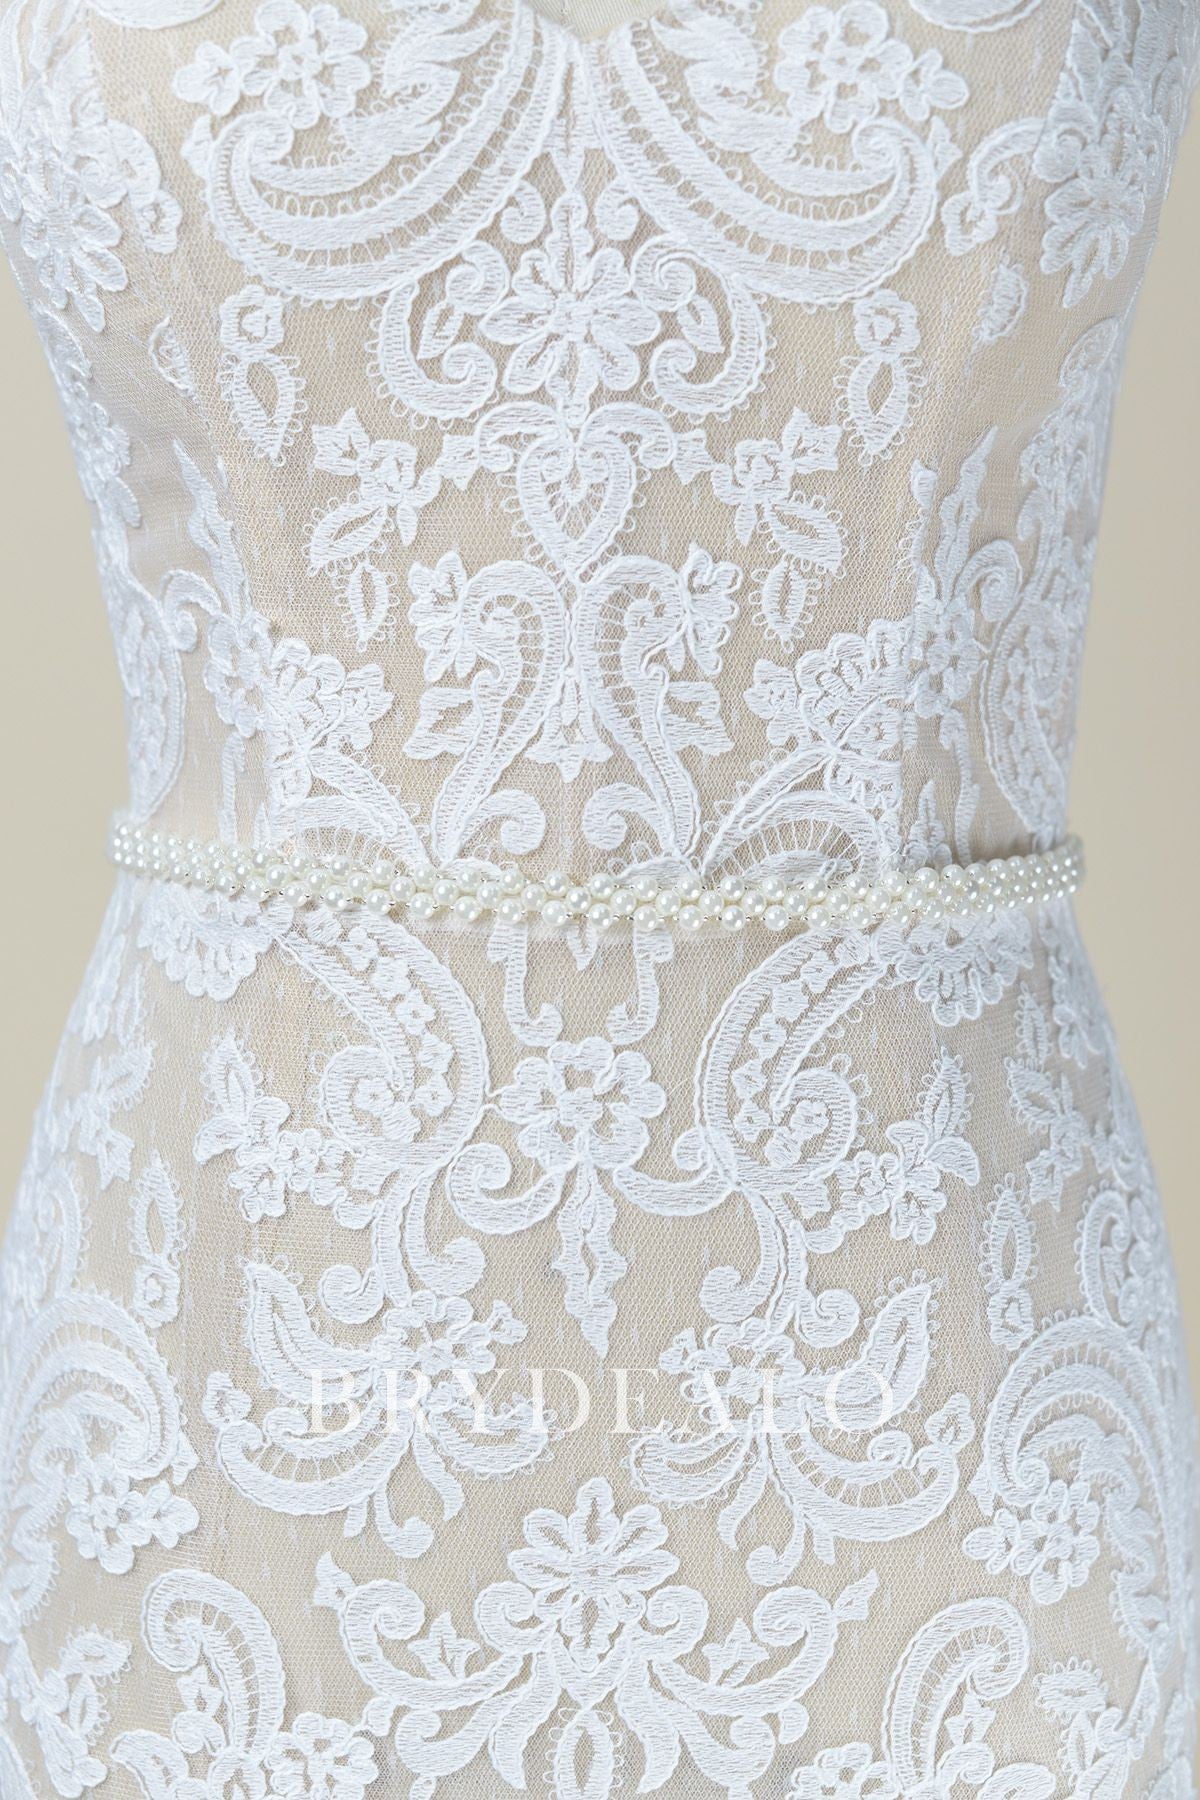 Exquisite Pearls Chiffon Bridal Sash for Wholesale